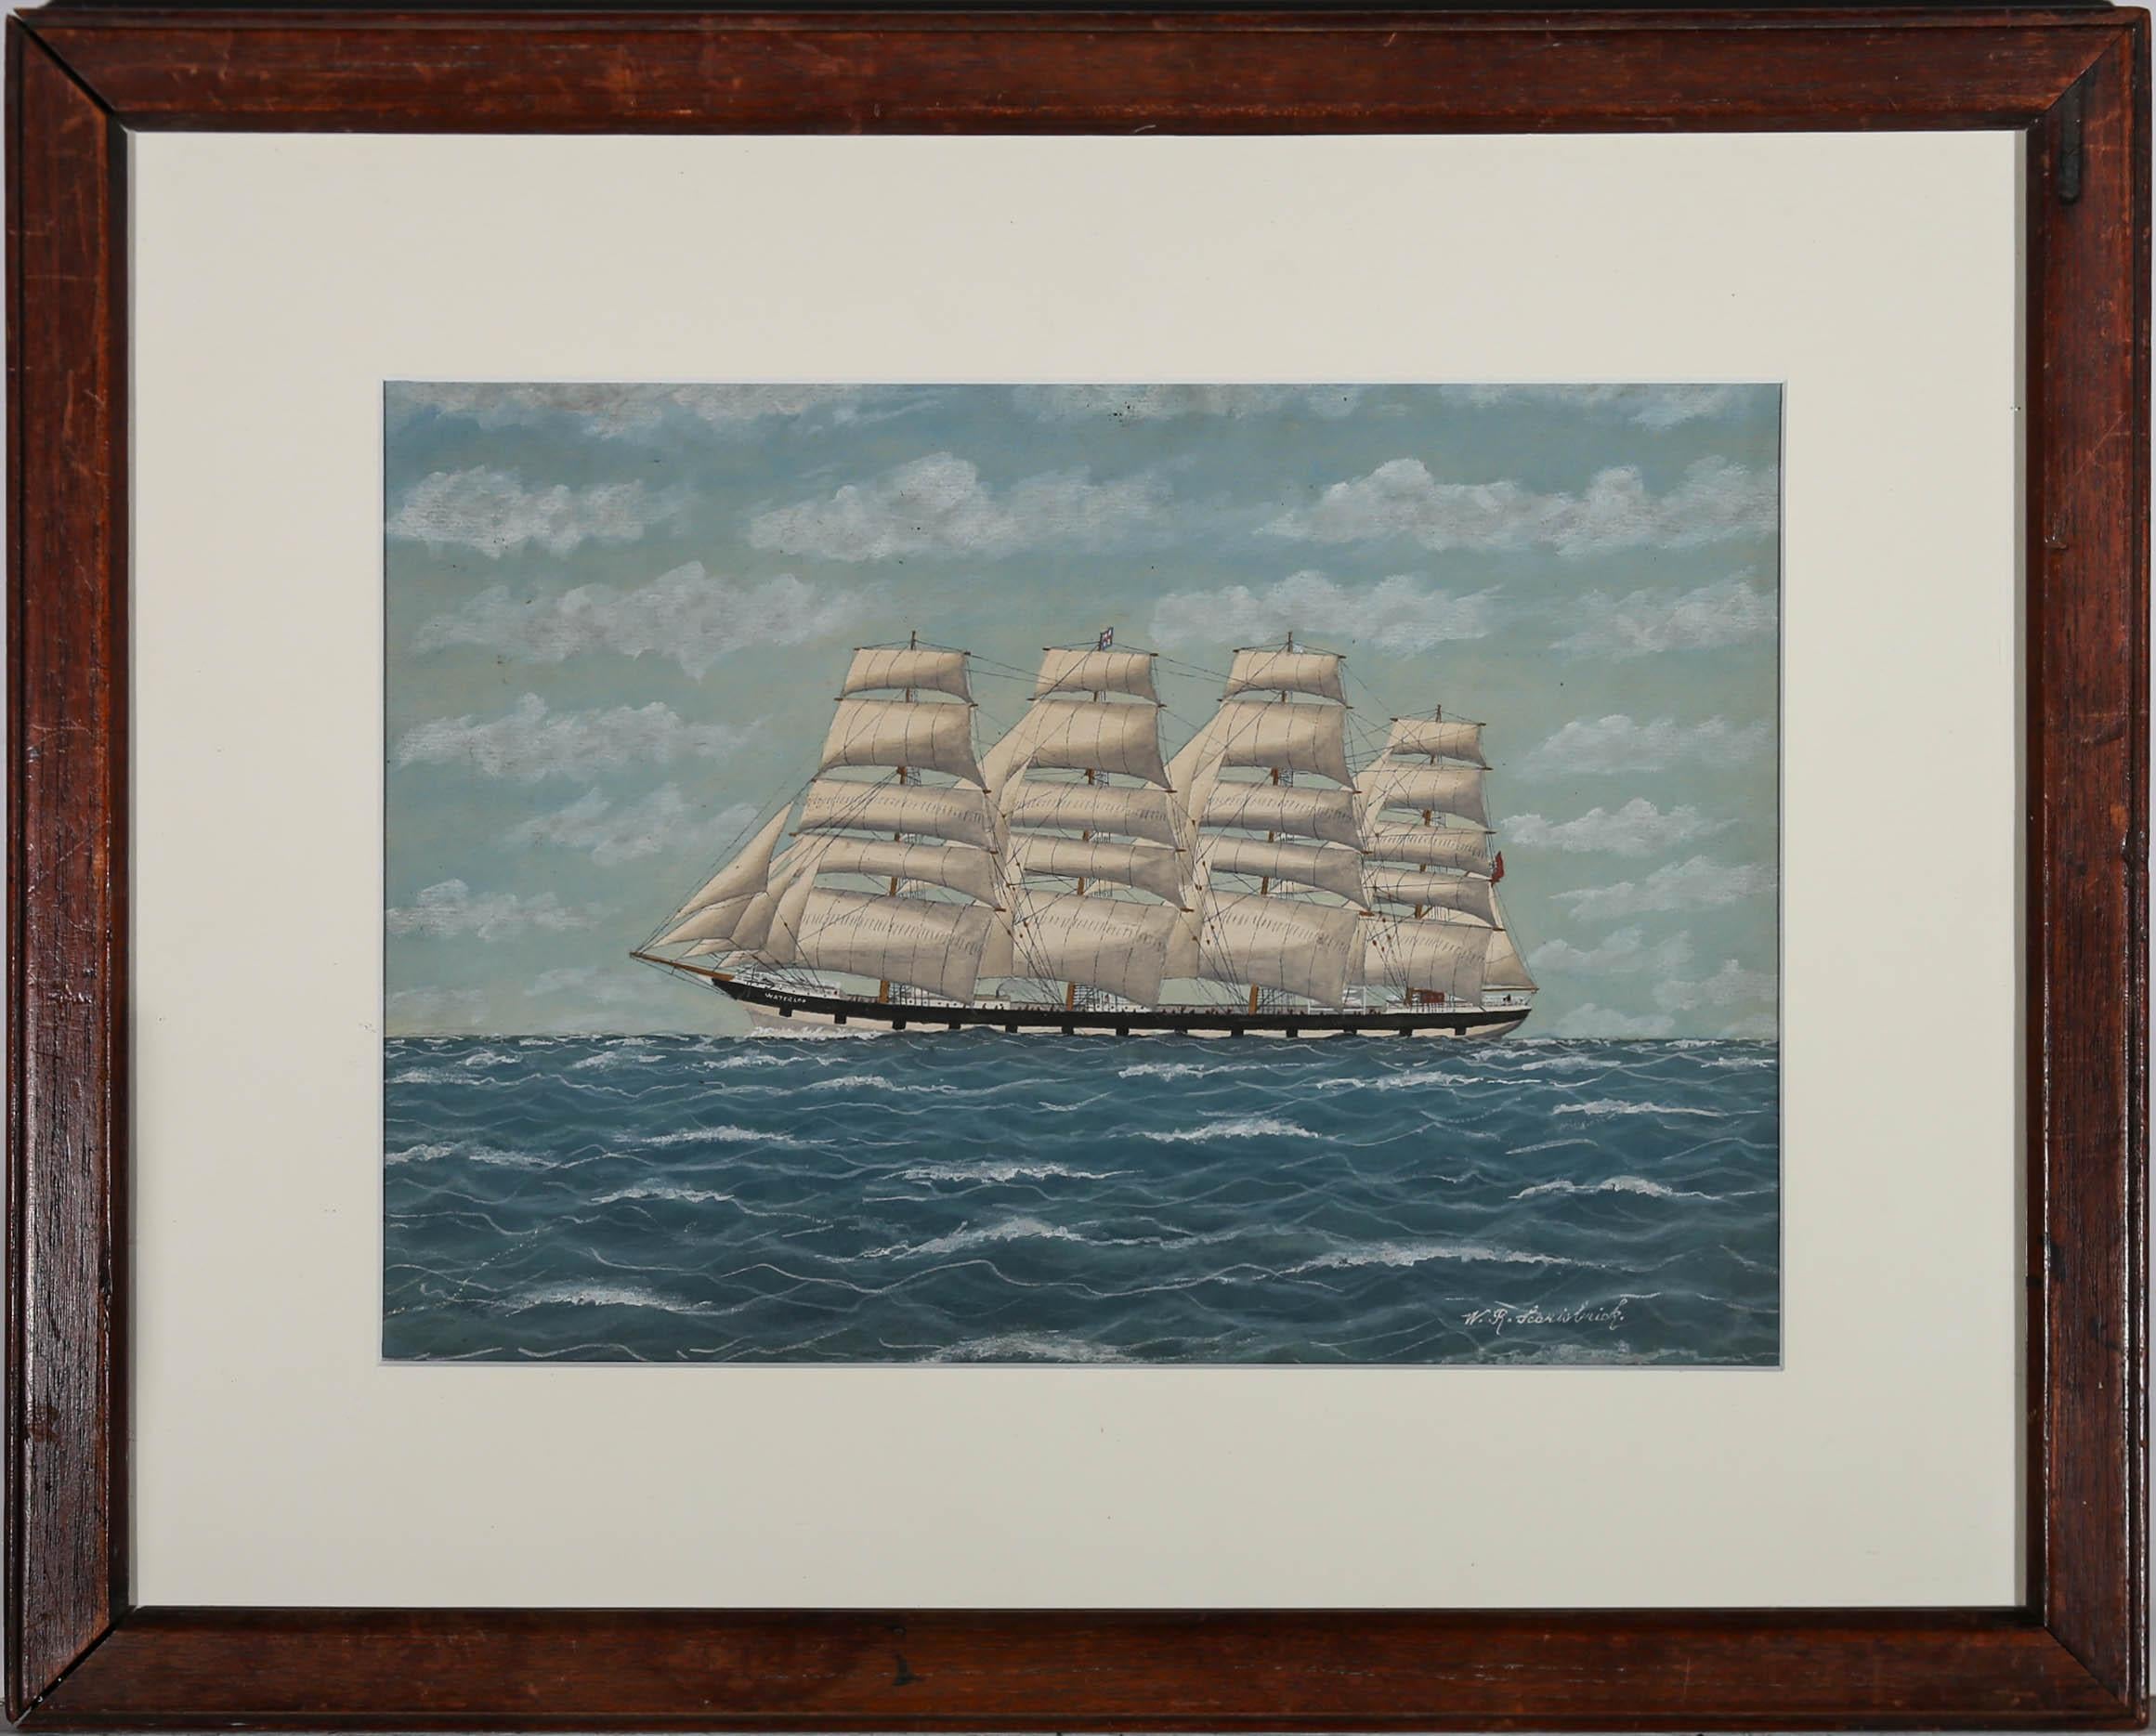 A refined late 19th Century nautical painting of the cargo ship, waterloo at full mast. Signed to the lower right-hand corner. Attractively presented in a new card mount and dark wooden frame. On watercolour paper.
